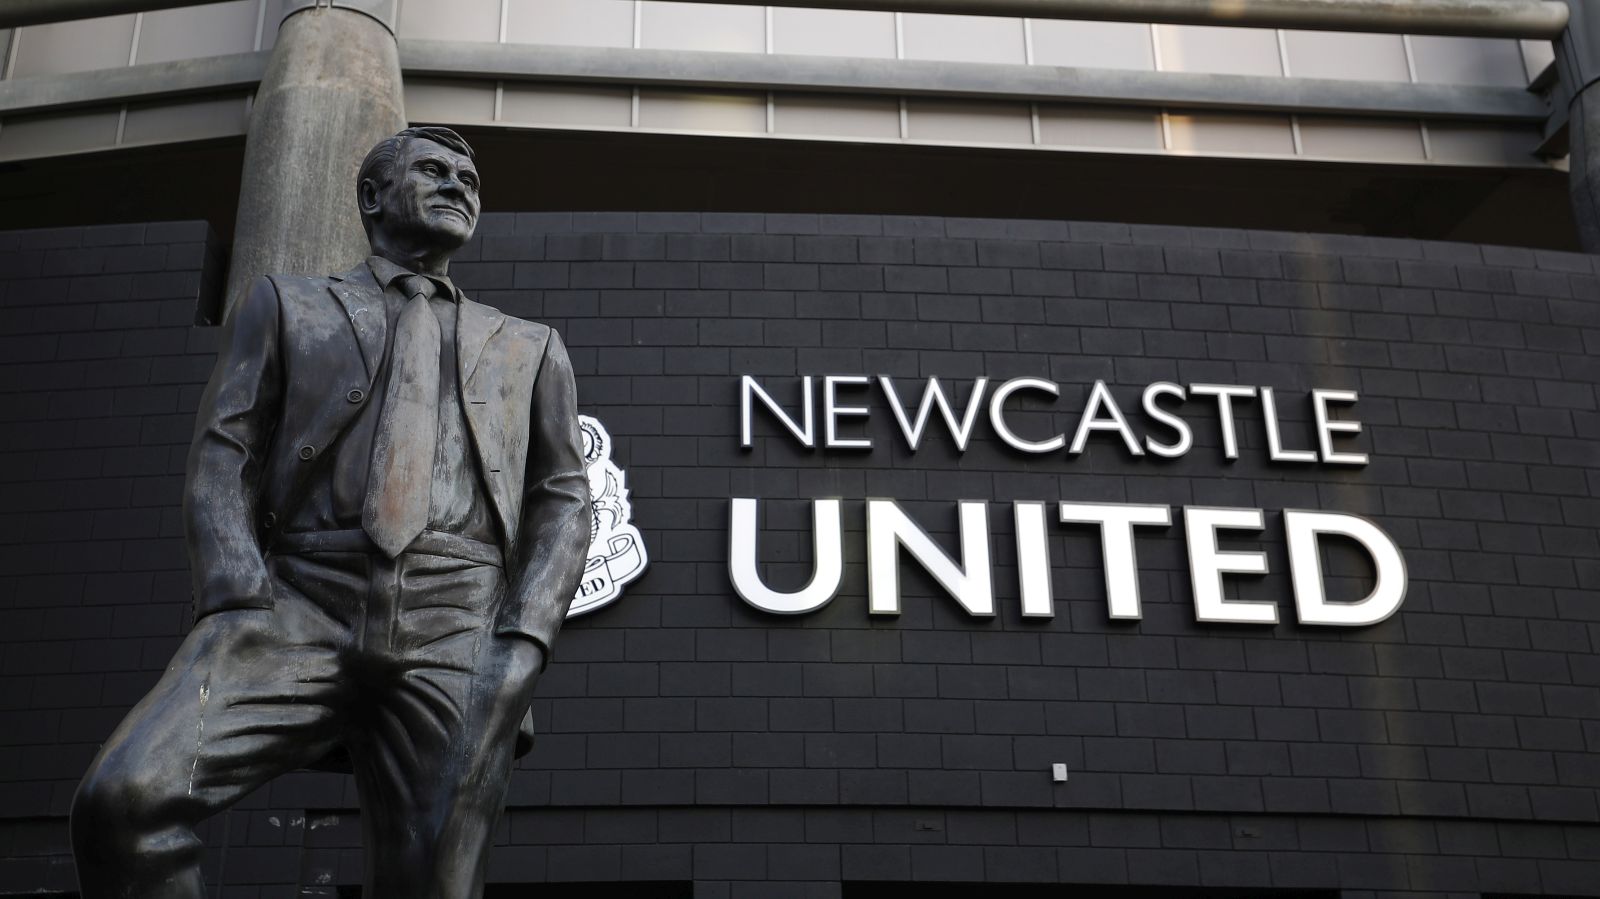 epa09511700 (FILE) - The Bobby Robson statue before the English Premier league soccer match between Newcastle United and Leicester City held at St James' Park stadium in Newcastle, Britain, 01 January 2020 (re-issued 07 October 2021). Newcastle United confirmed on 07 October 2021 that the Saudi Public Investment Fund (PIF), and also comprising PCP Capital Partners and RB Sports & Media, has completed the takeover of Newcastle United.  EPA/LYNNE CAMERON EDITORIAL USE ONLY. No use with unauthorized audio, video, data, fixture lists, club/league logos or 'live' services. Online in-match use limited to 120 images, no video emulation. No use in betting, games or single club/league/player publications *** Local Caption *** 55816254